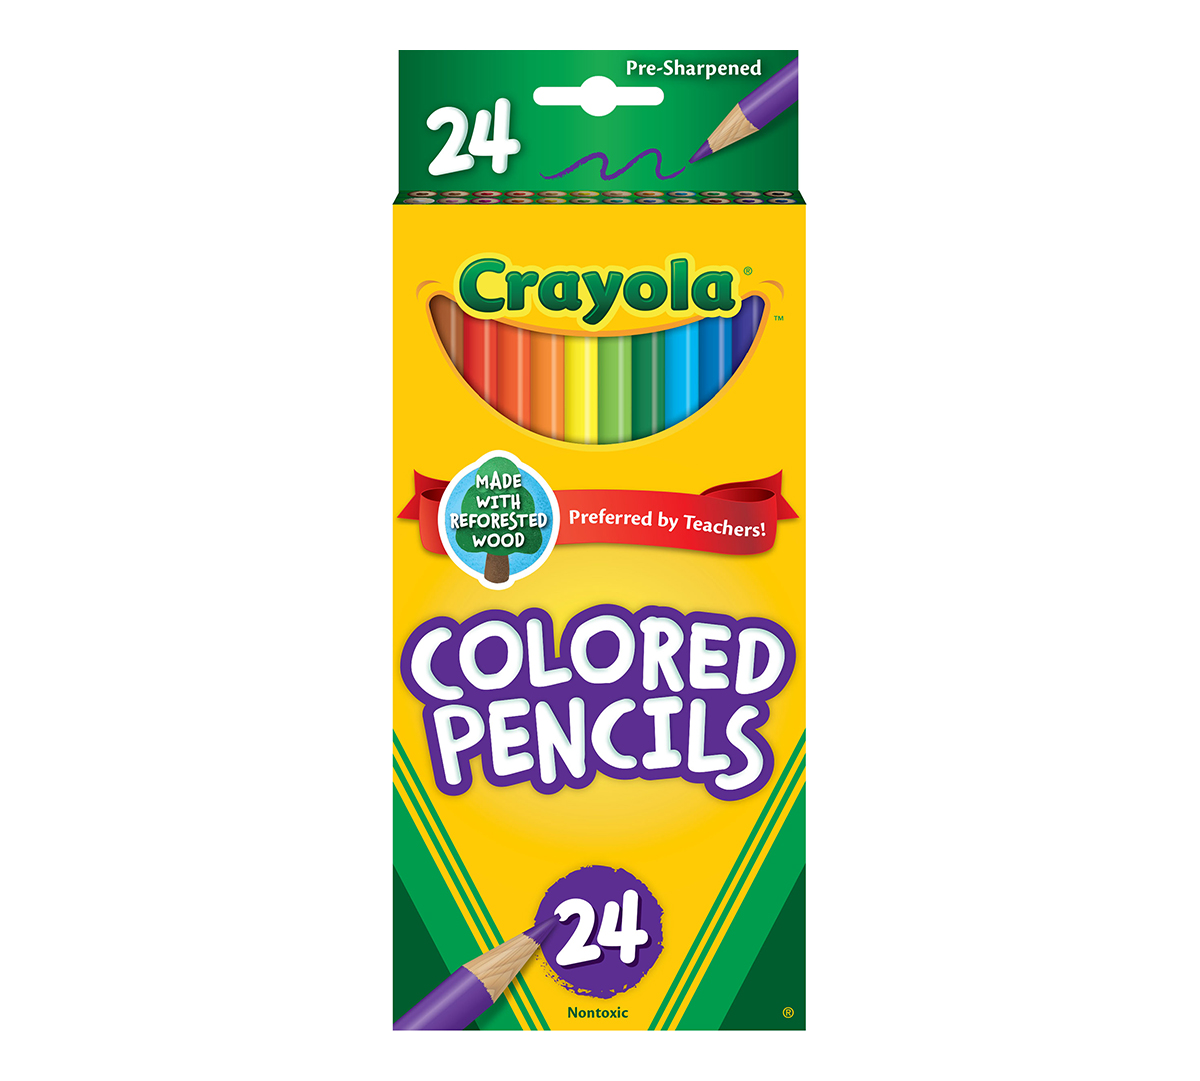 Crayola® Colors of the World 24-Count Colored Pencils - Set of 4